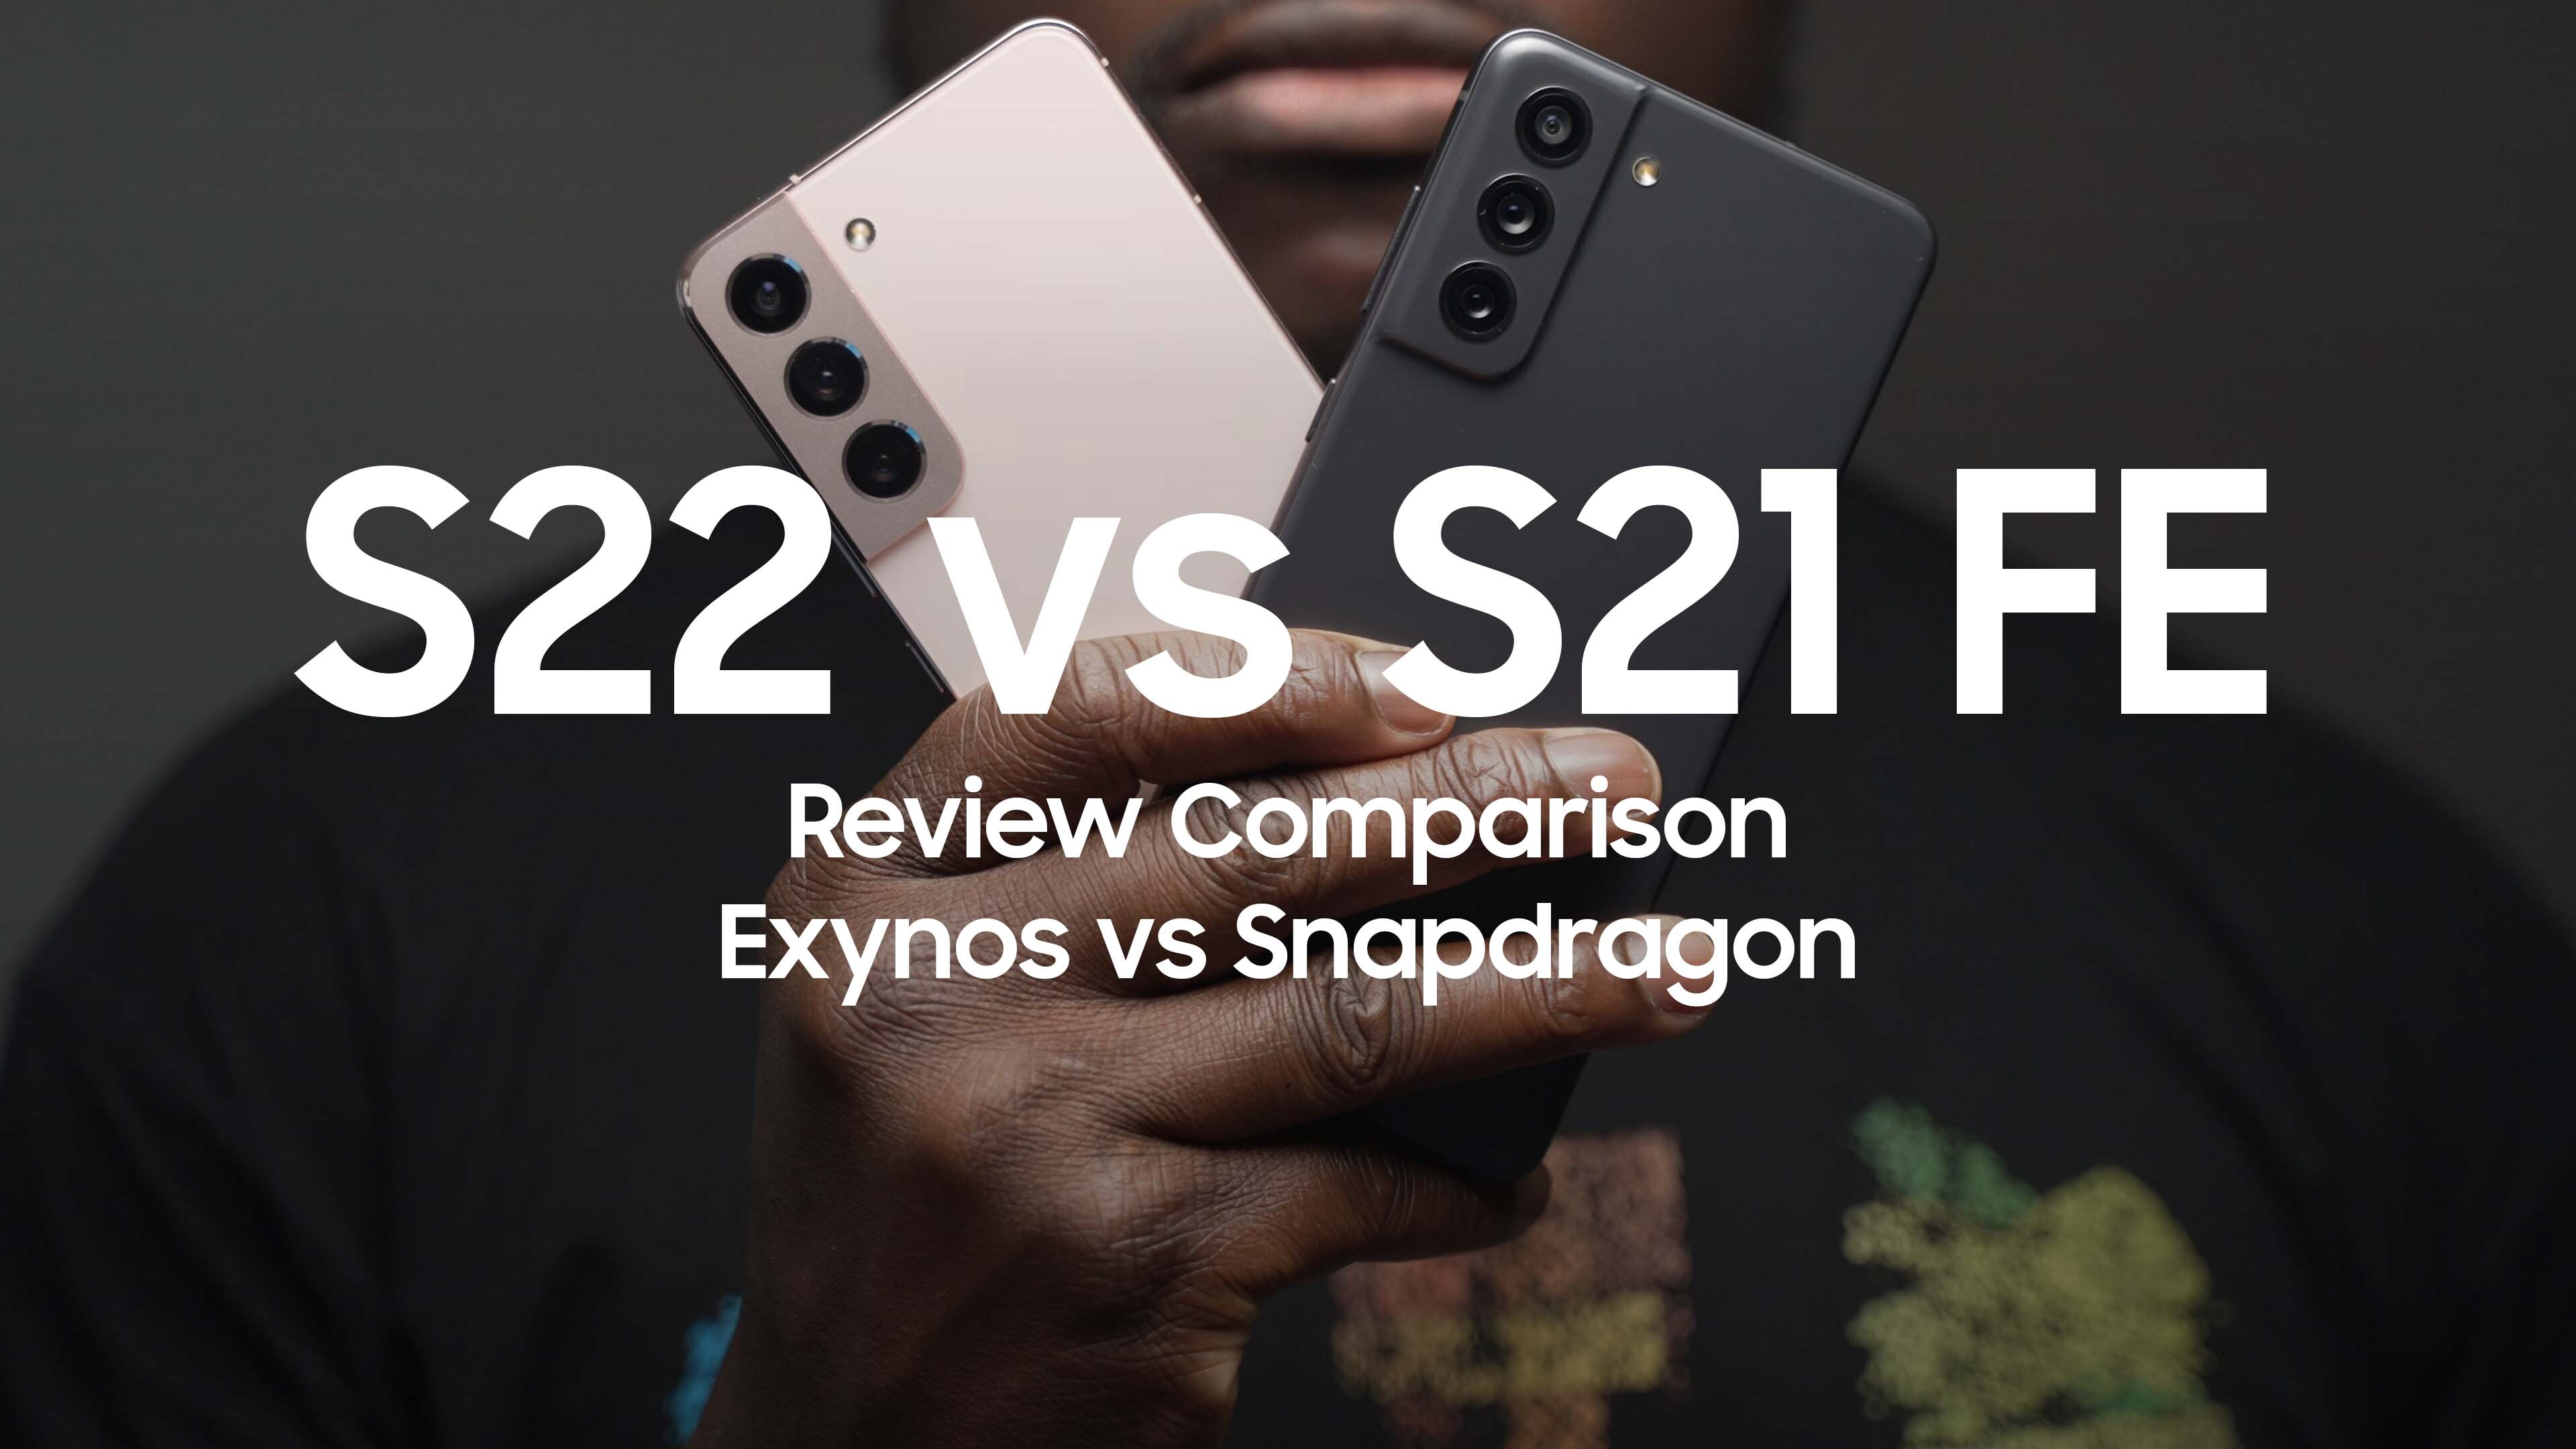 Our new Galaxy S22 vs Galaxy S21 FE quick-fire review video is live! -  SamMobile